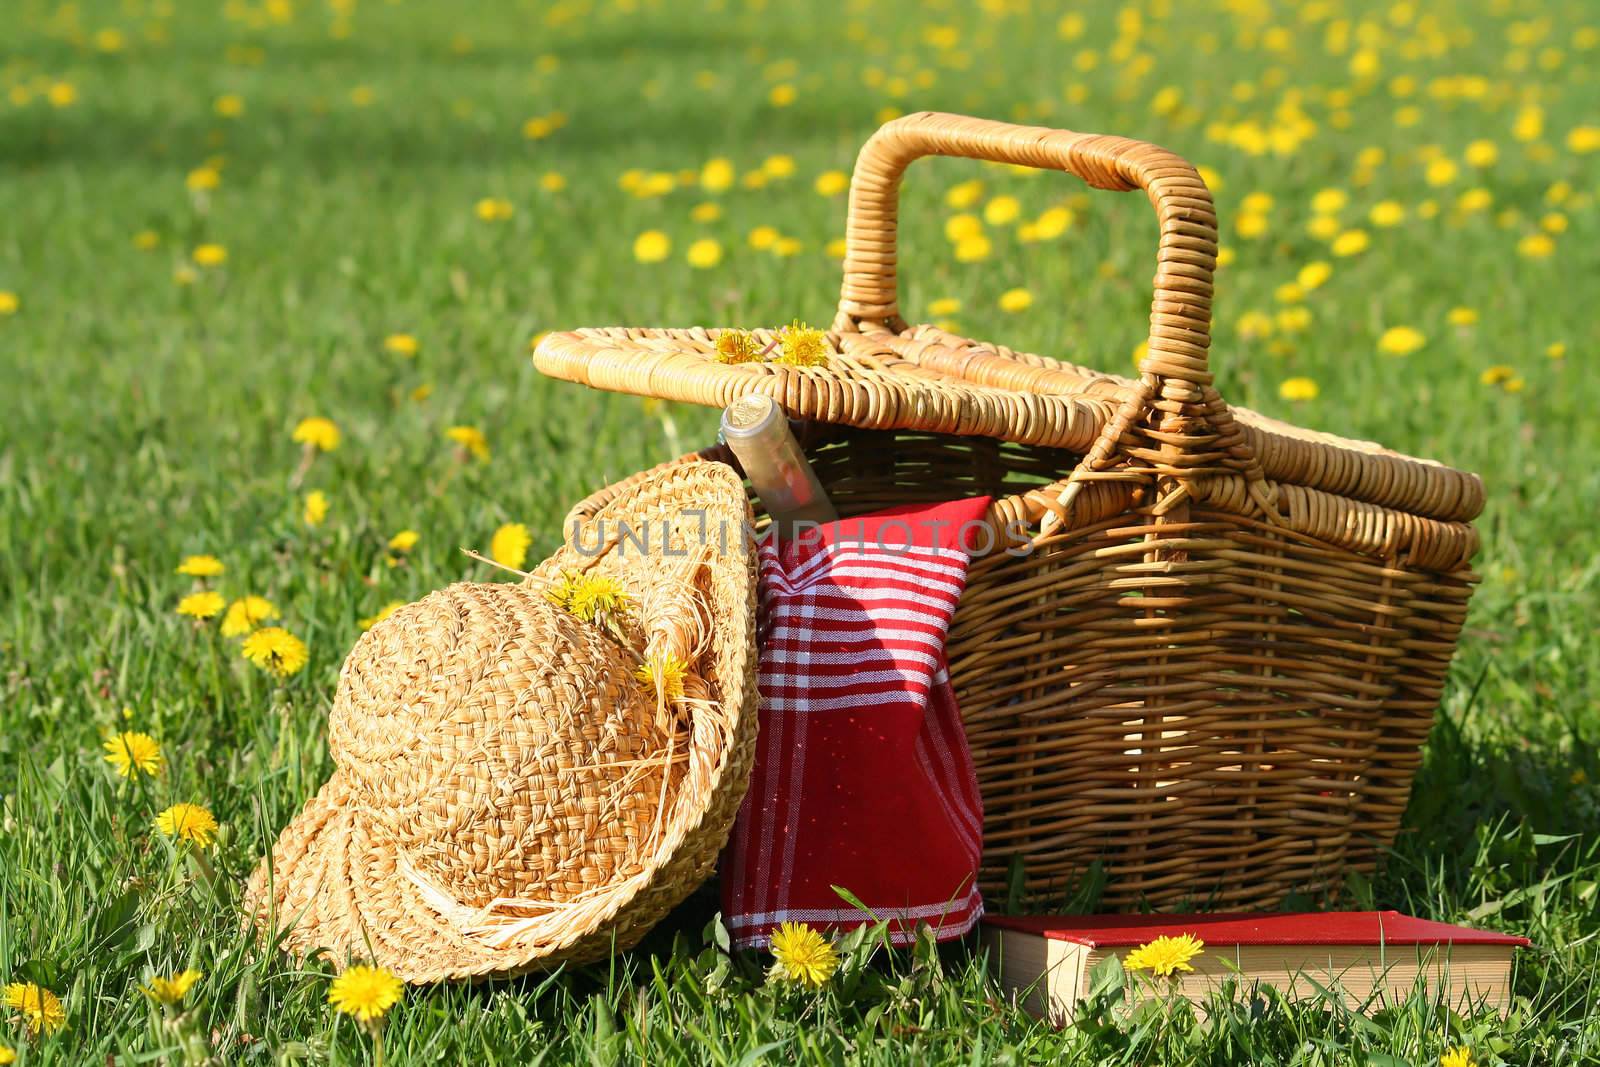 Picnic basket and straw hat  by Sandralise